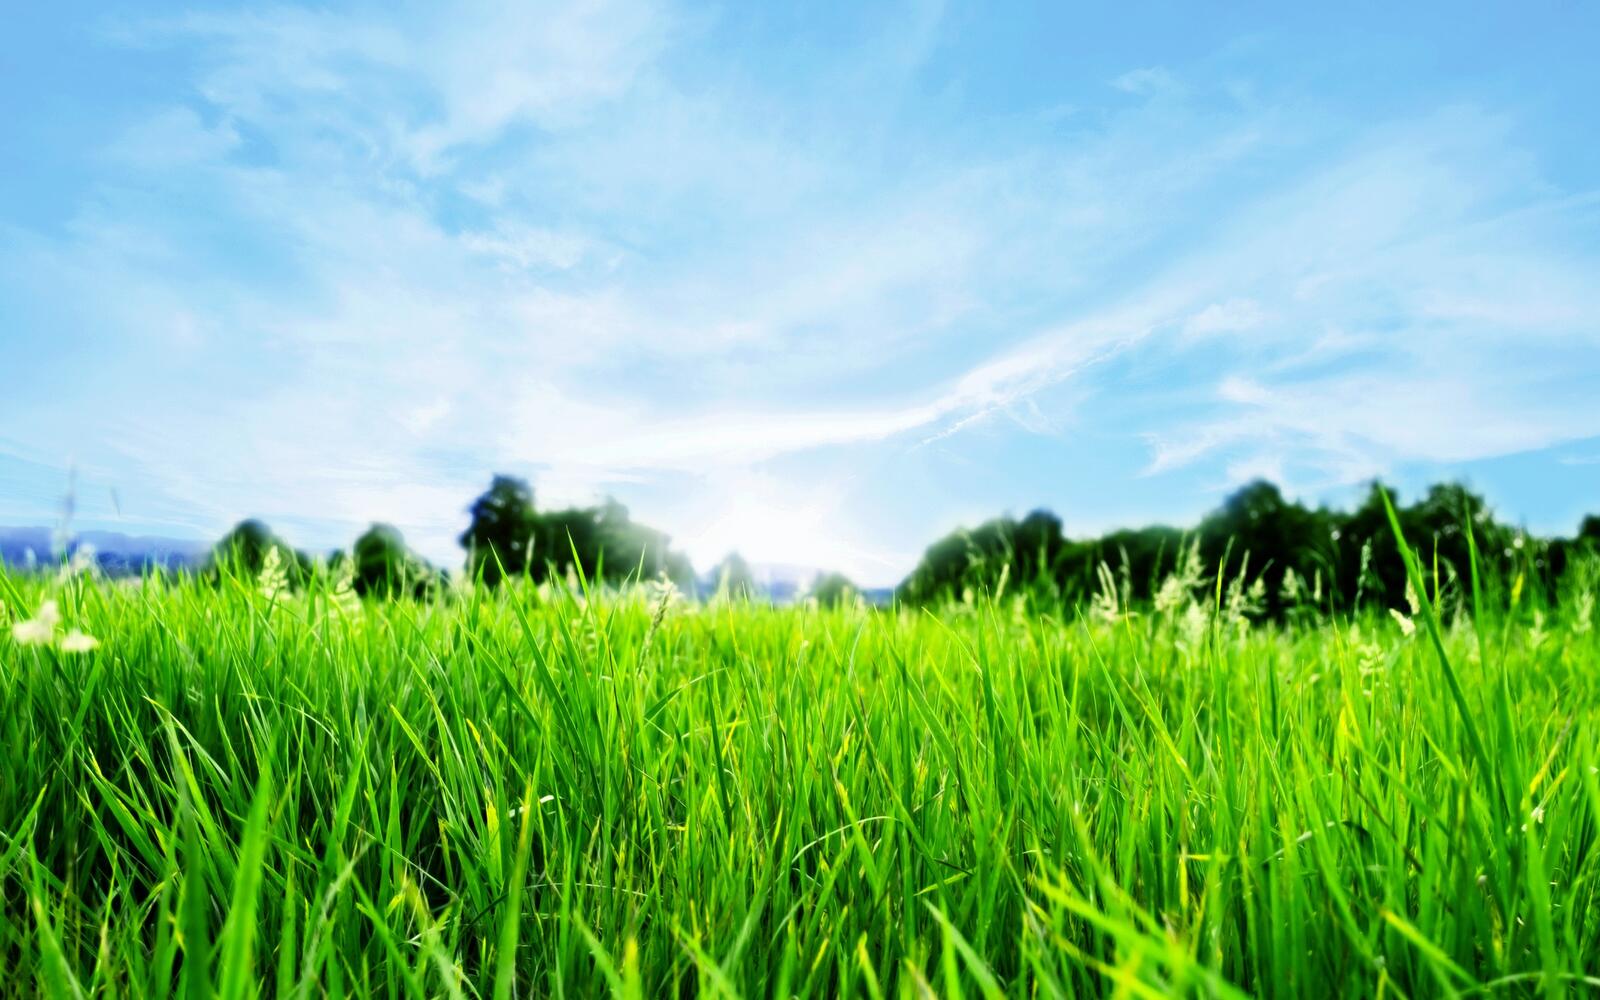 Free photo A picture of green grass